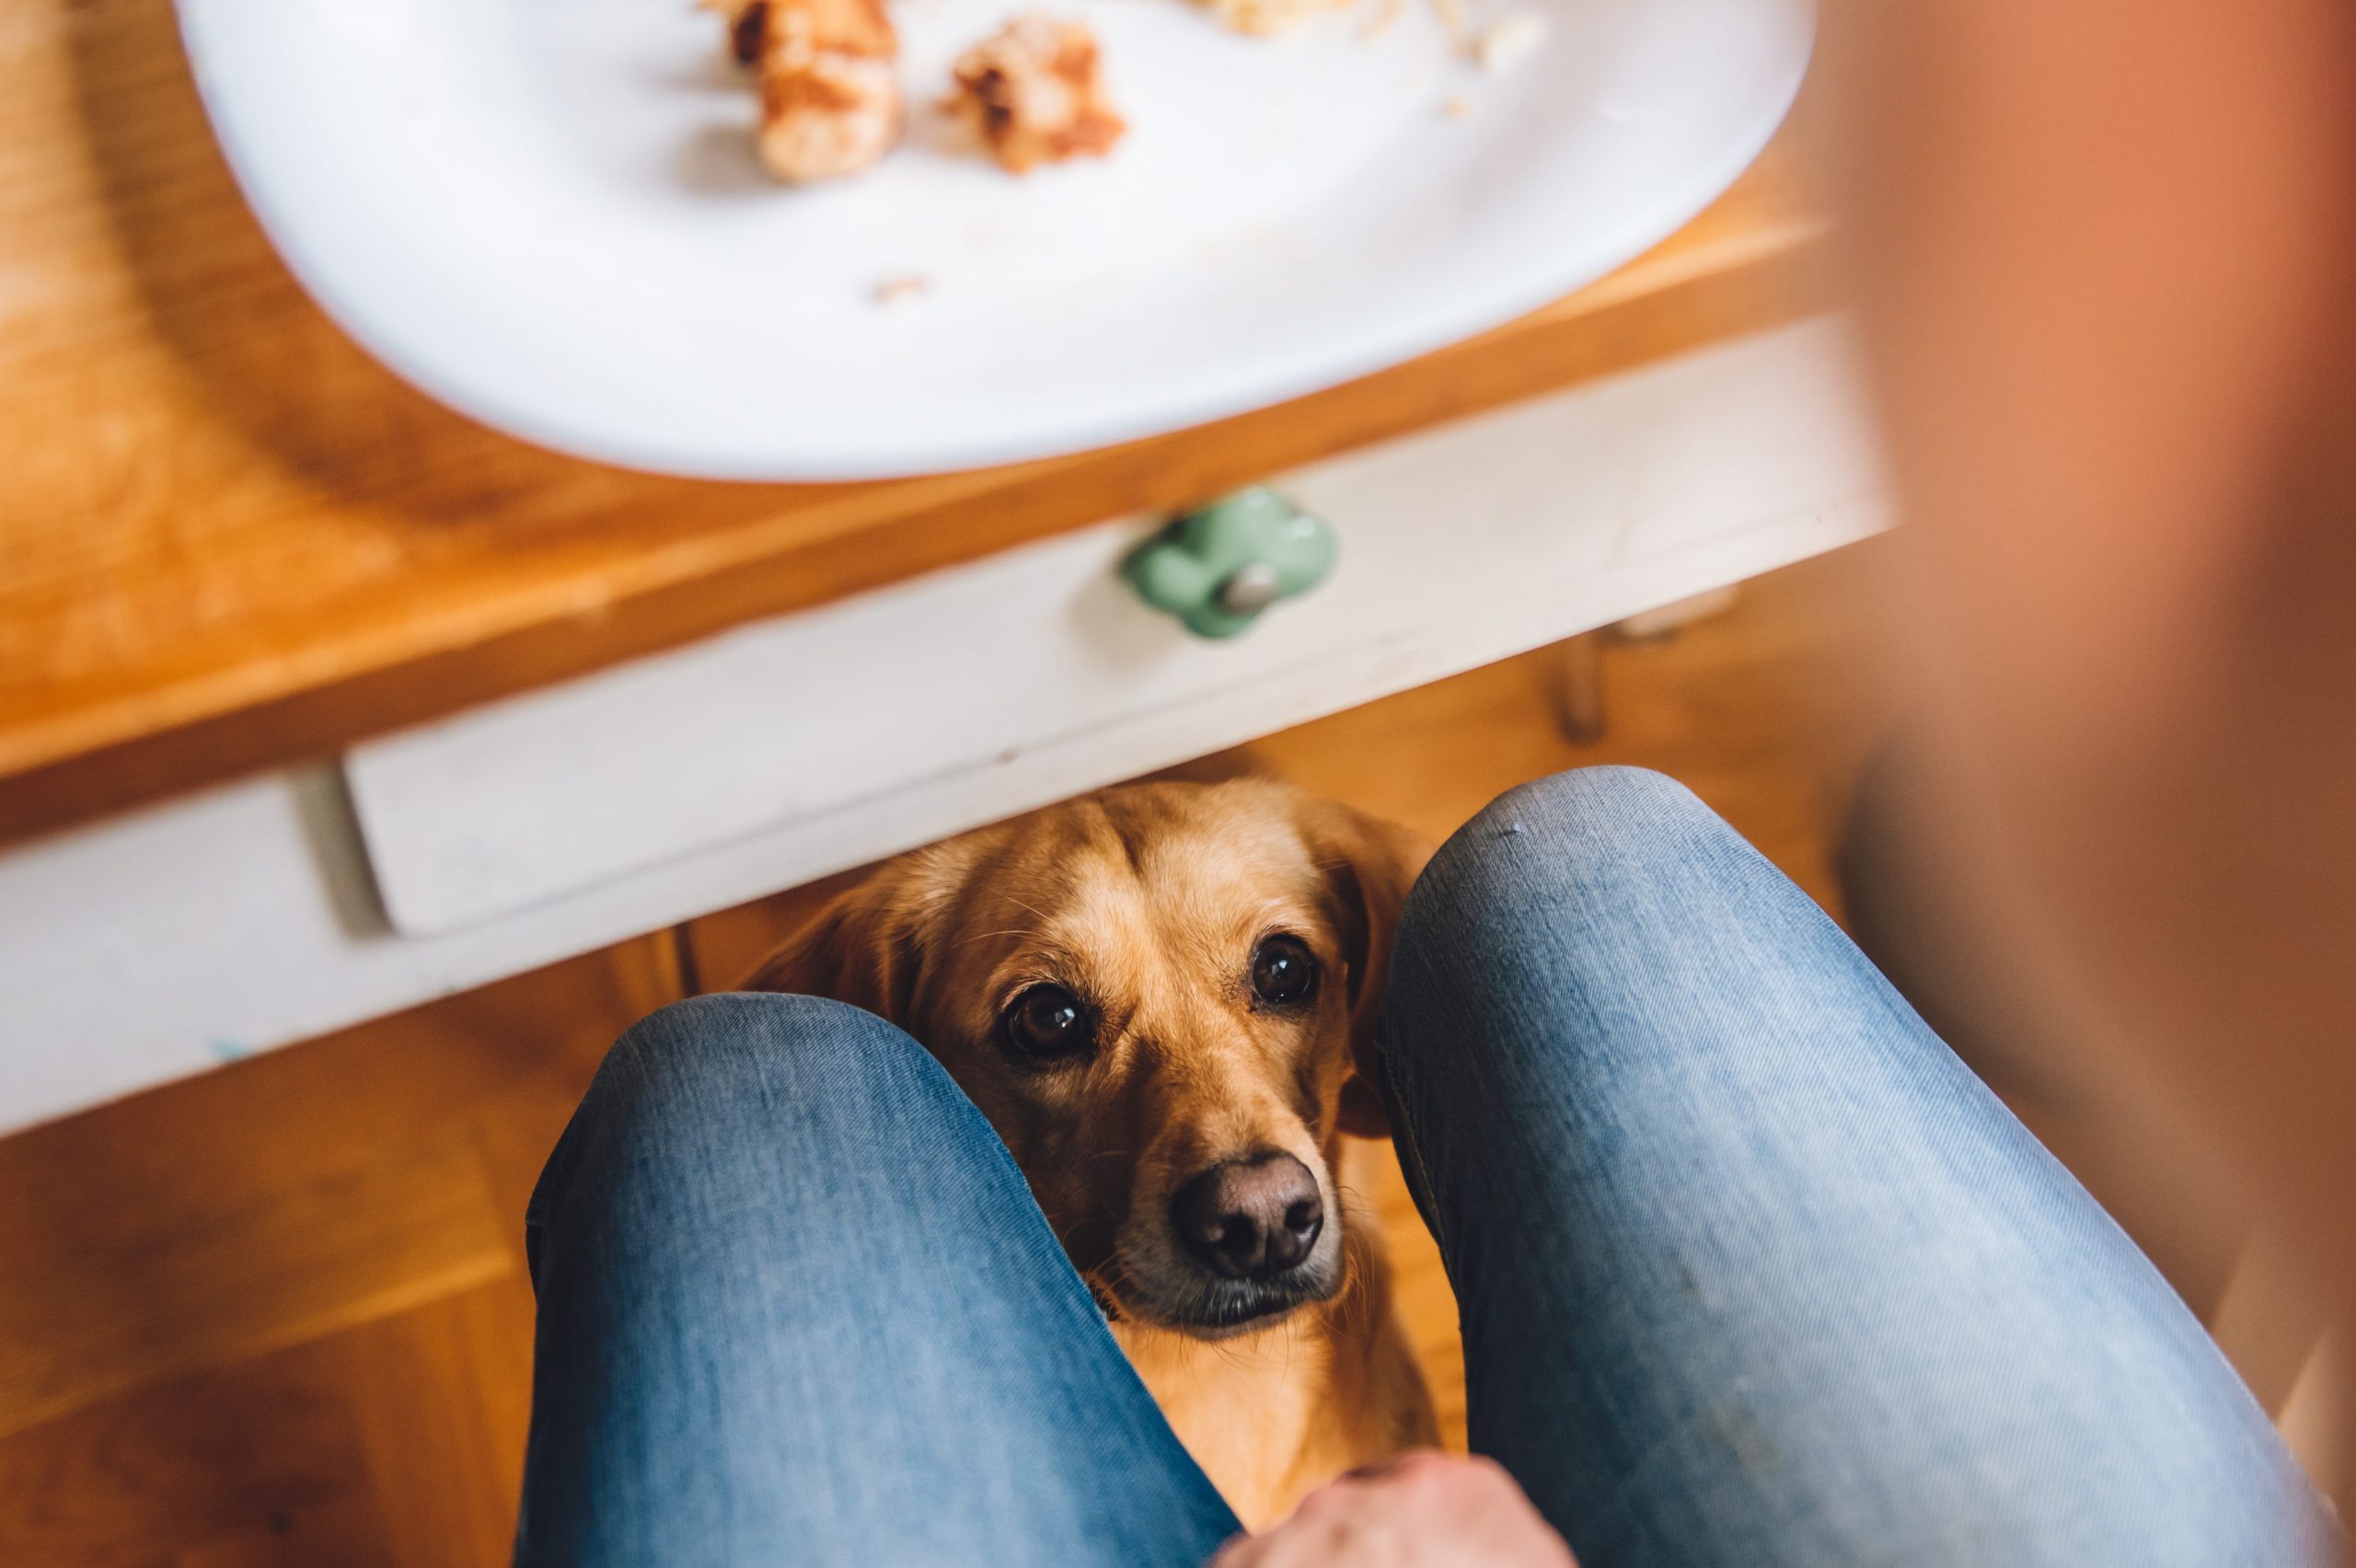 Why Does My Dog Stare at Me? The Reasons Behind Your Dog's Behavior